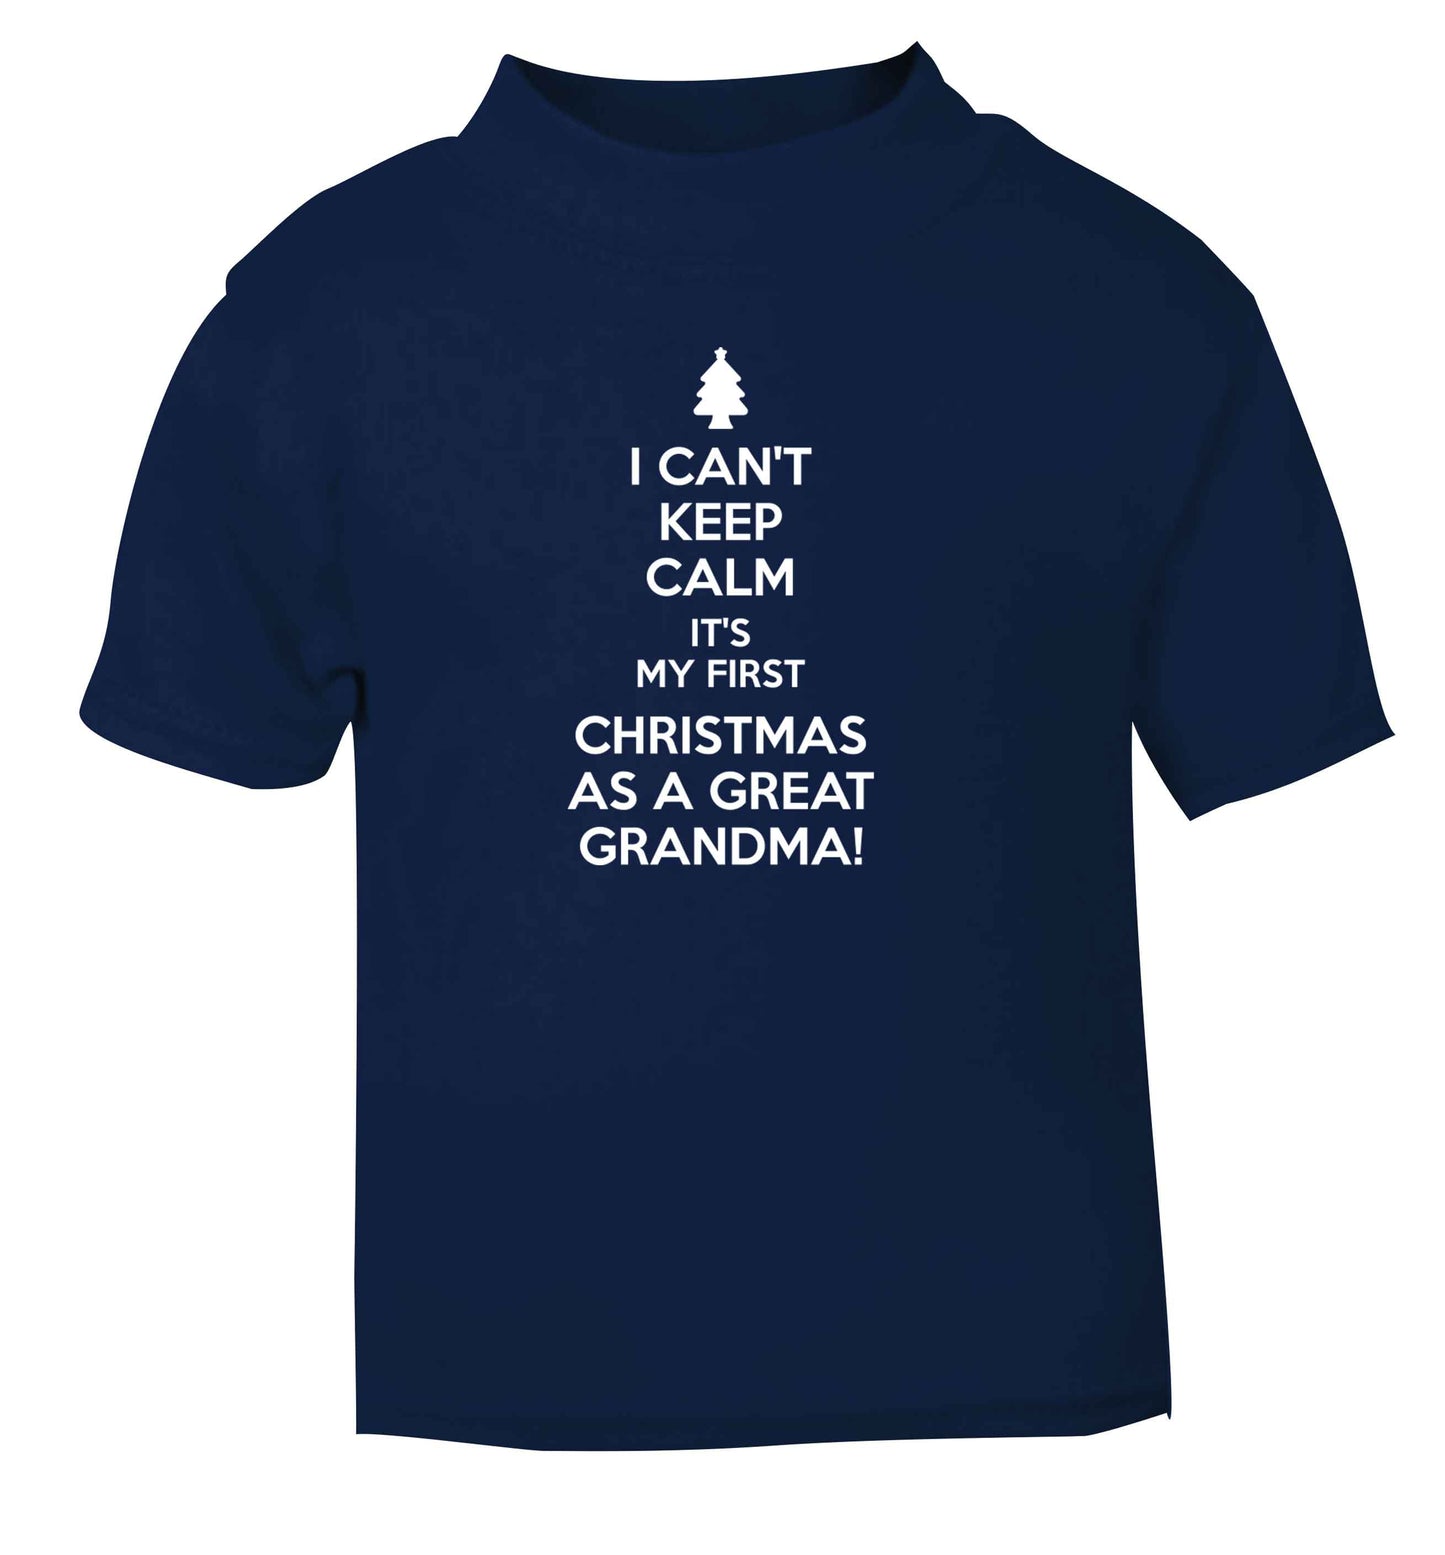 I can't keep calm it's my first Christmas as a great grandma! navy Baby Toddler Tshirt 2 Years